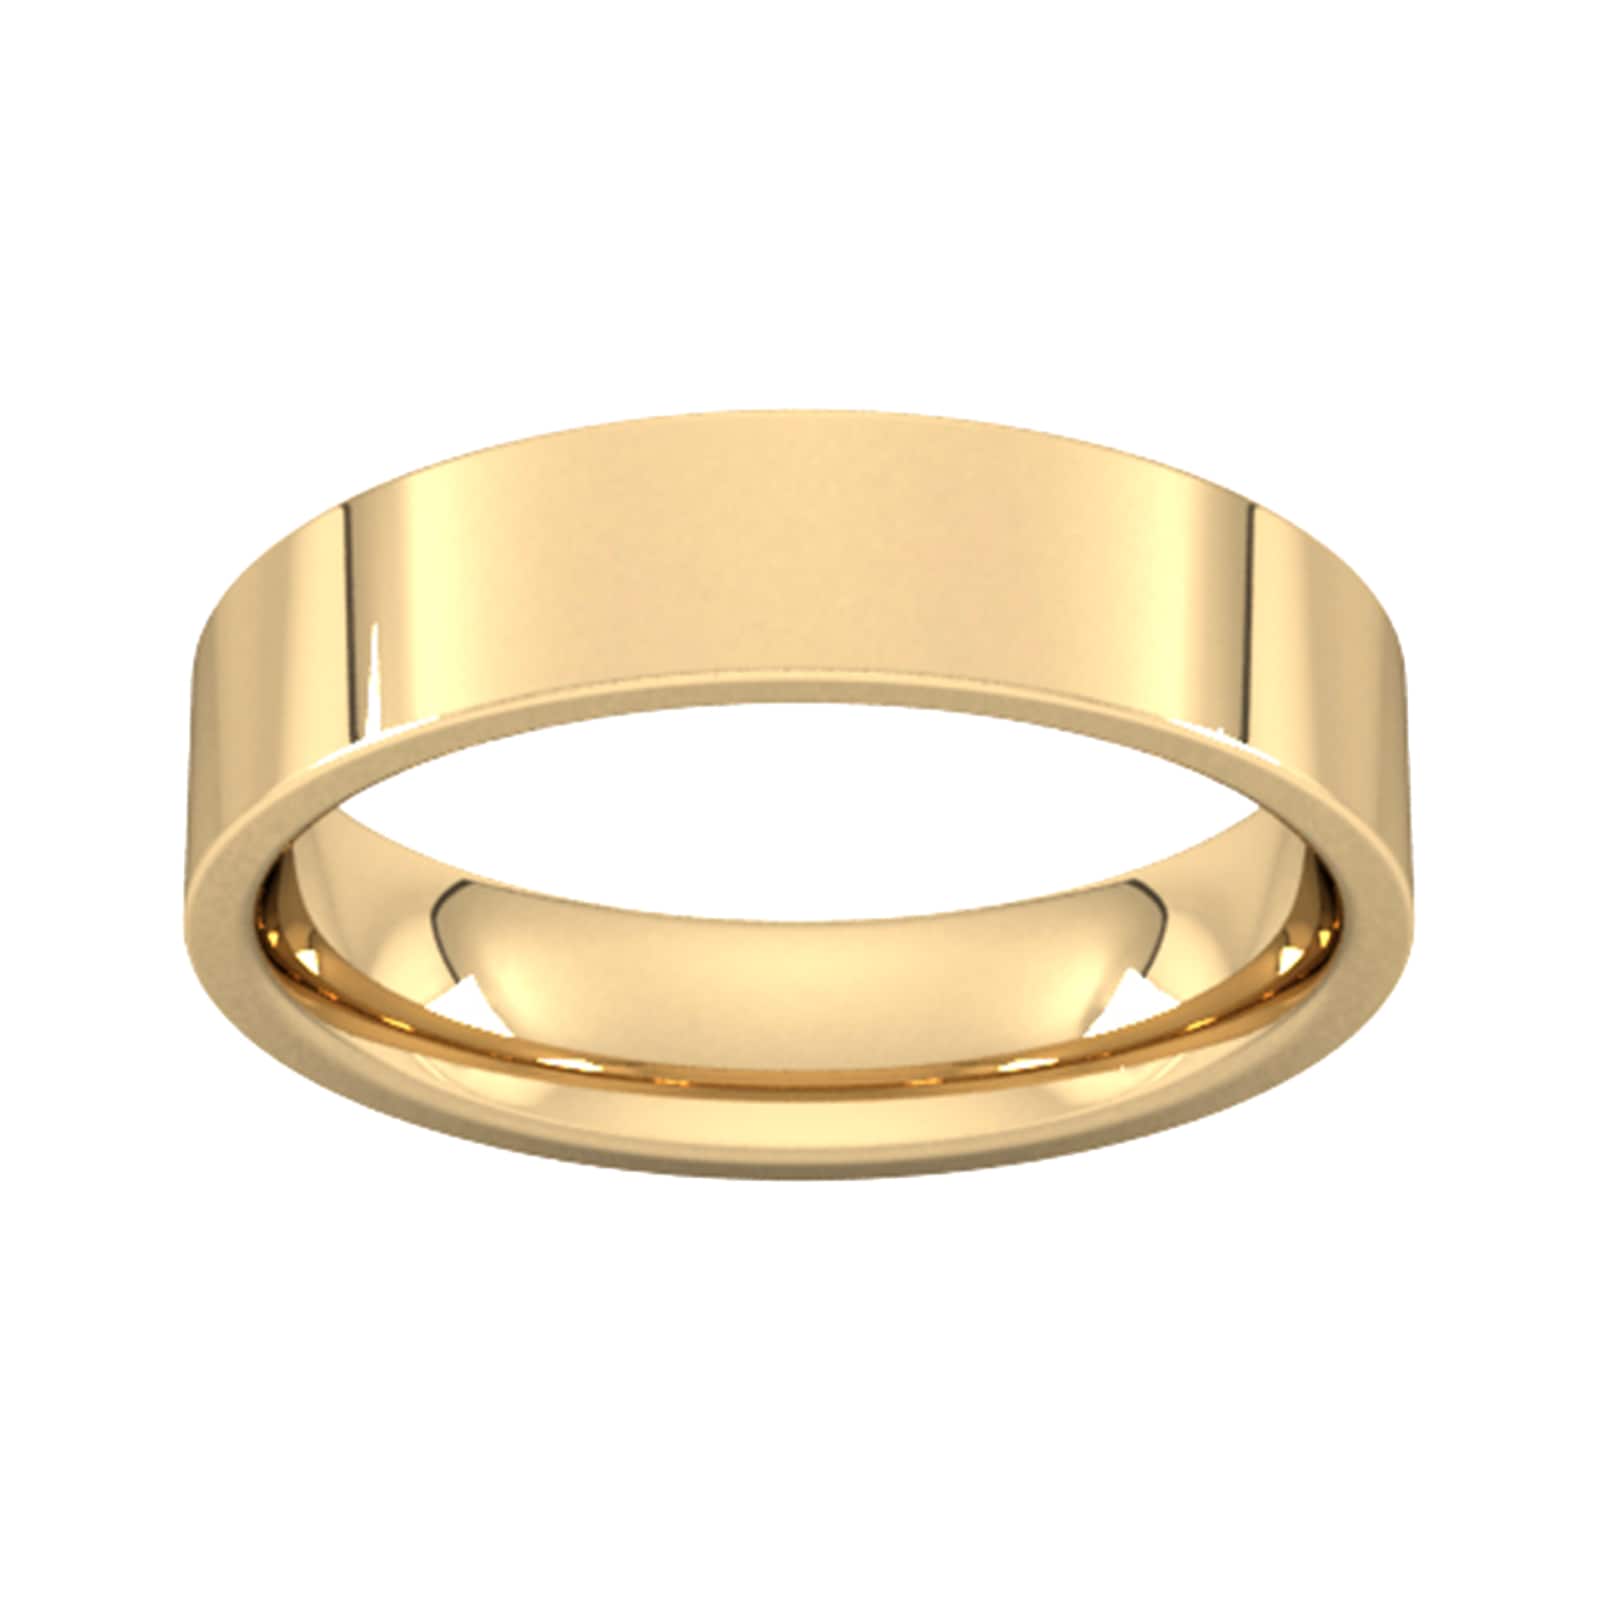 5mm Flat Court Heavy Wedding Ring In 9 Carat Yellow Gold - Ring Size O